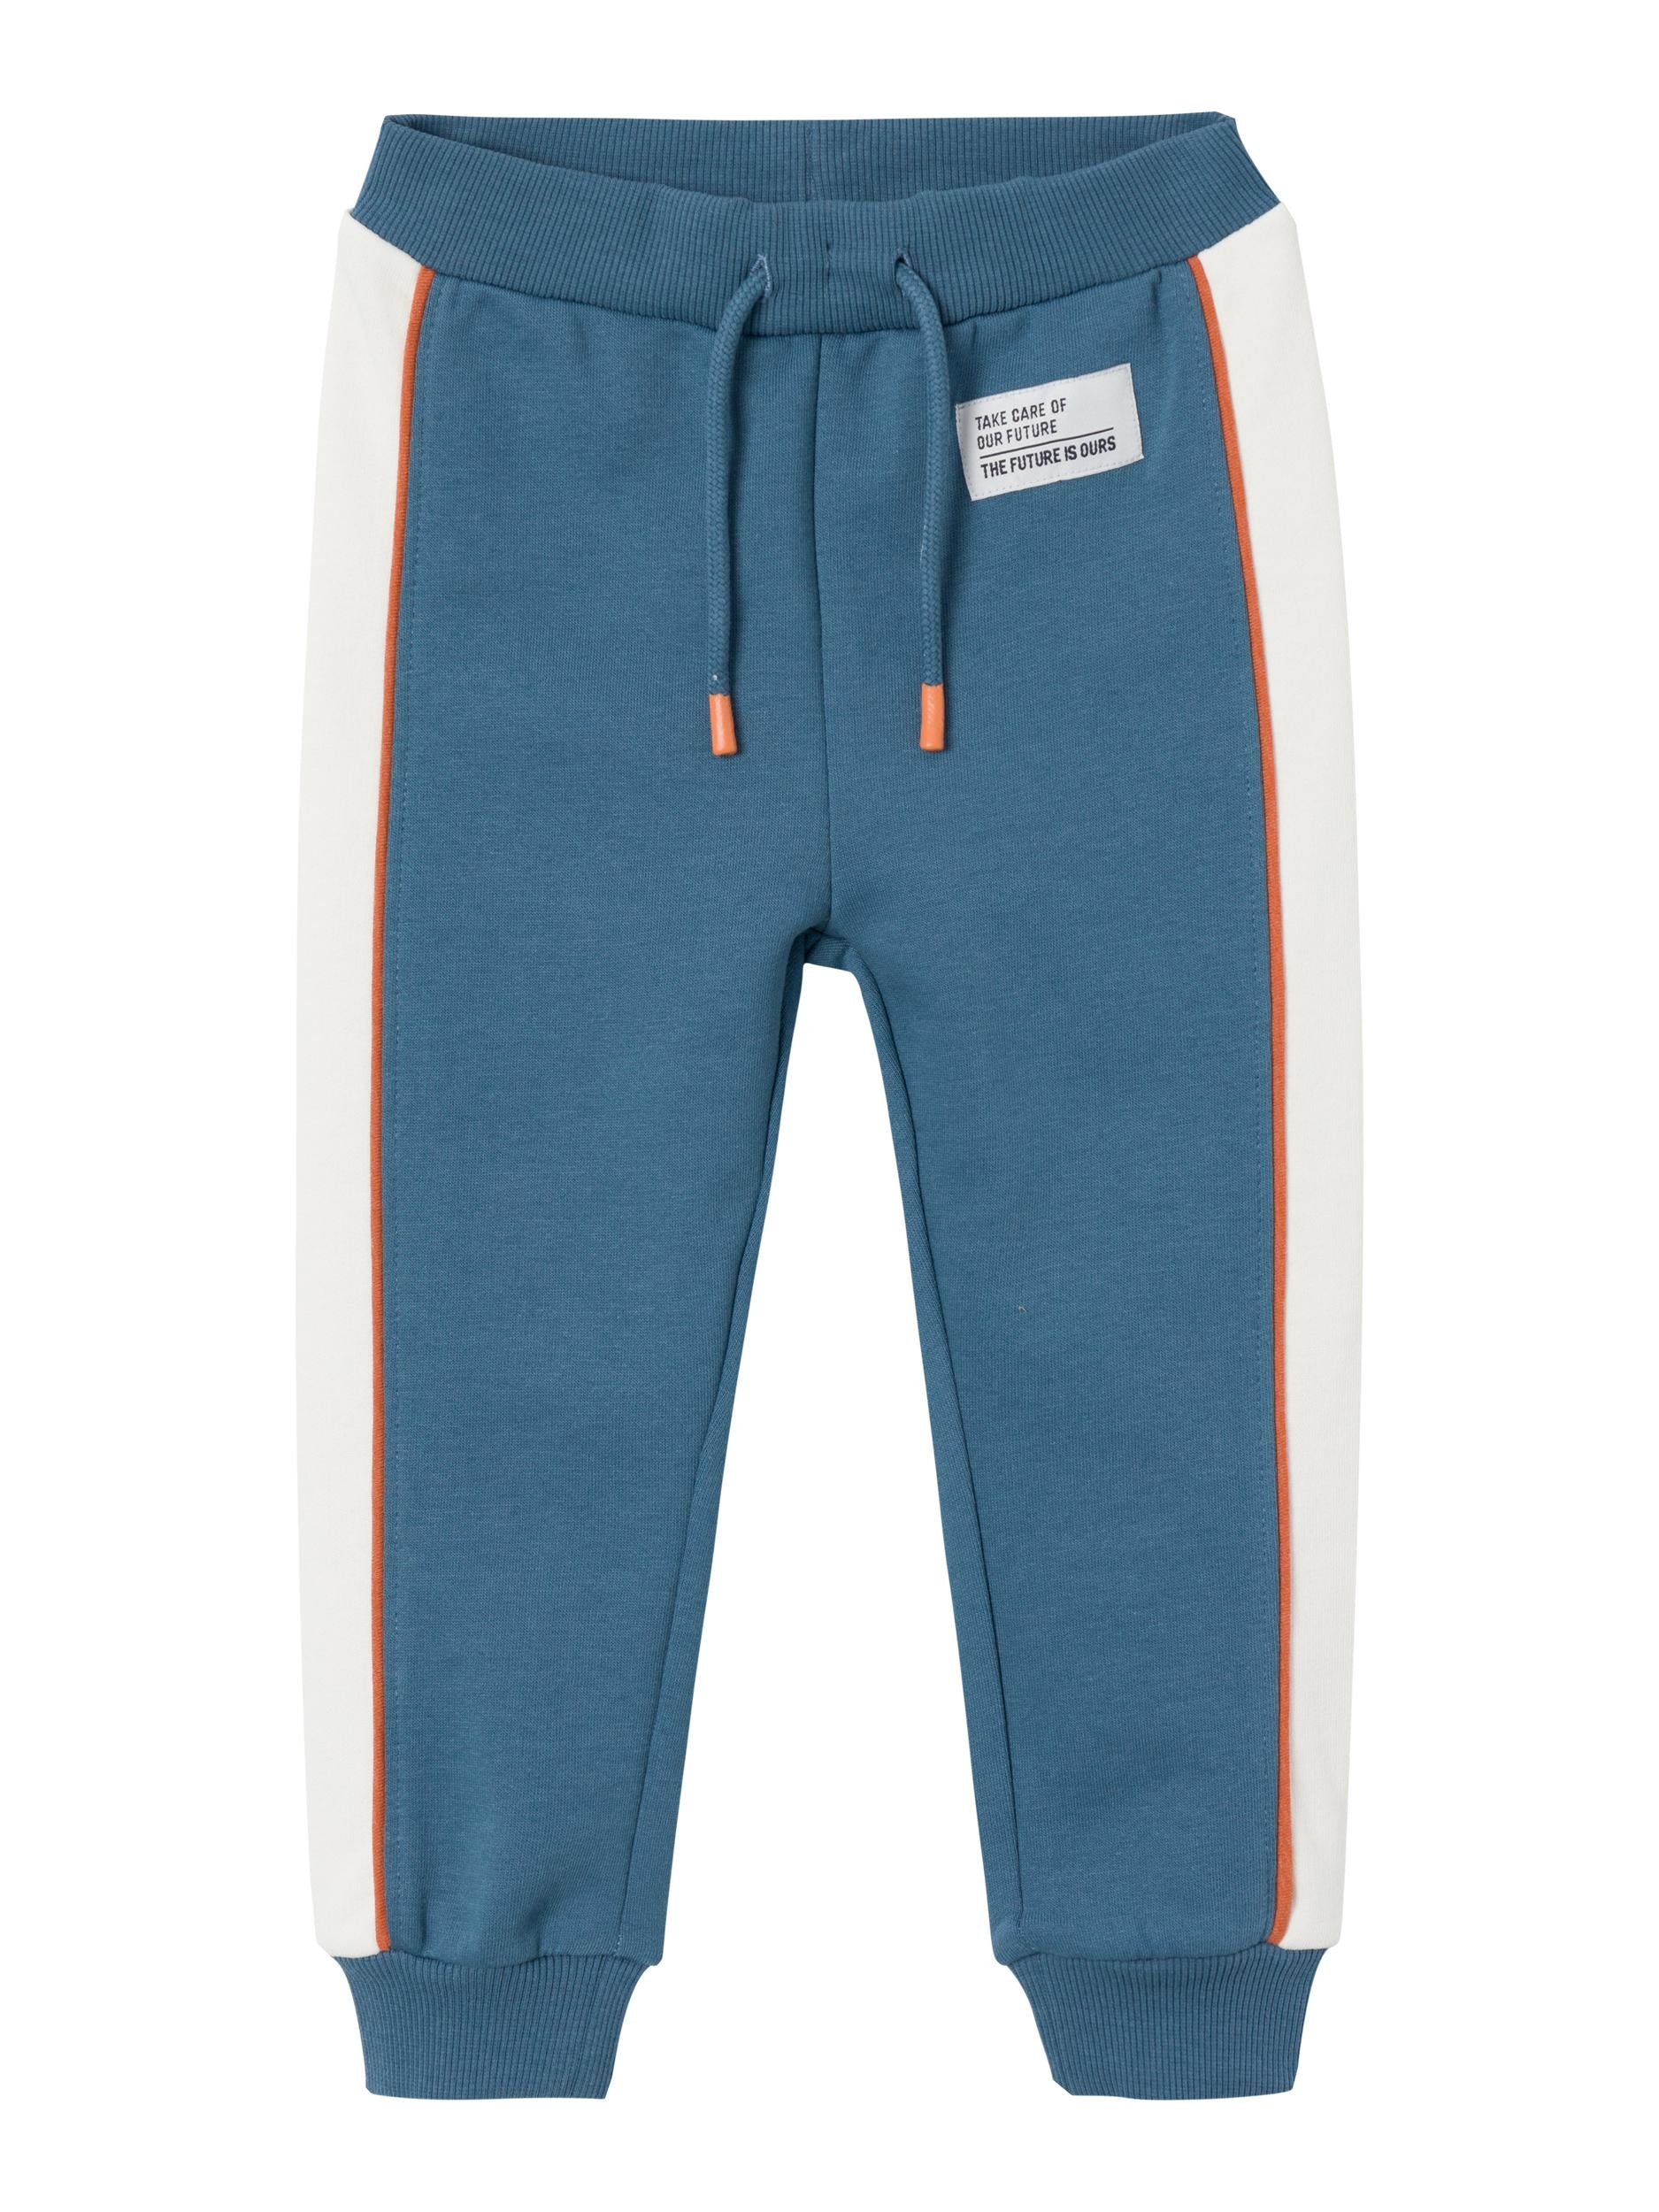 Boy's Nulle Sweat Pant-Bluefin-Front View